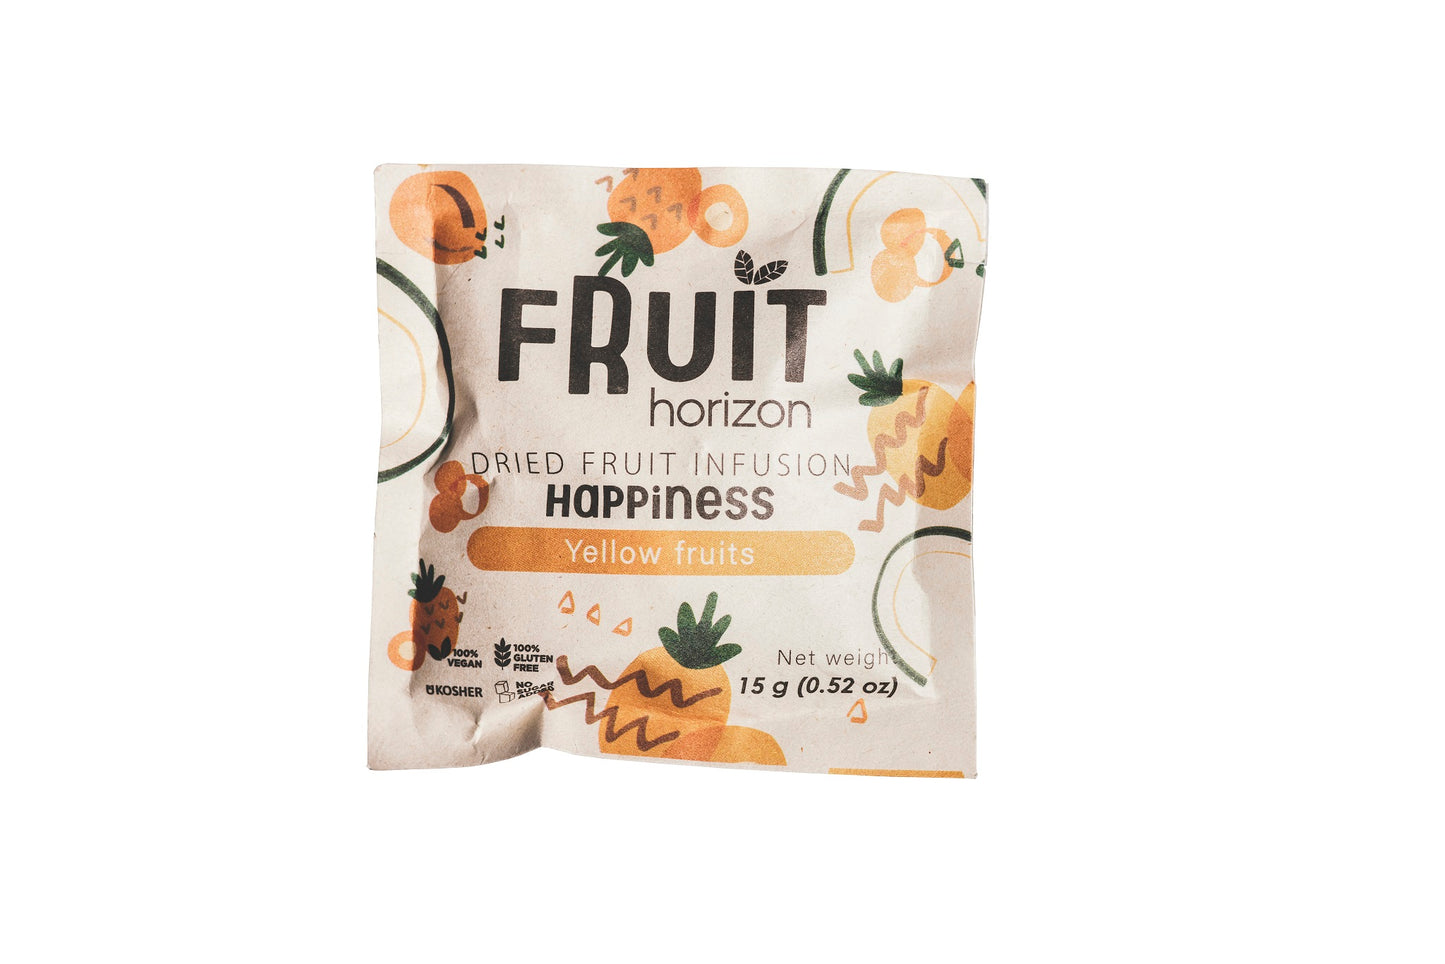 Fruit Horizon Fruit Infusion "Happiness" 24 pieces (refill pack for gift box)